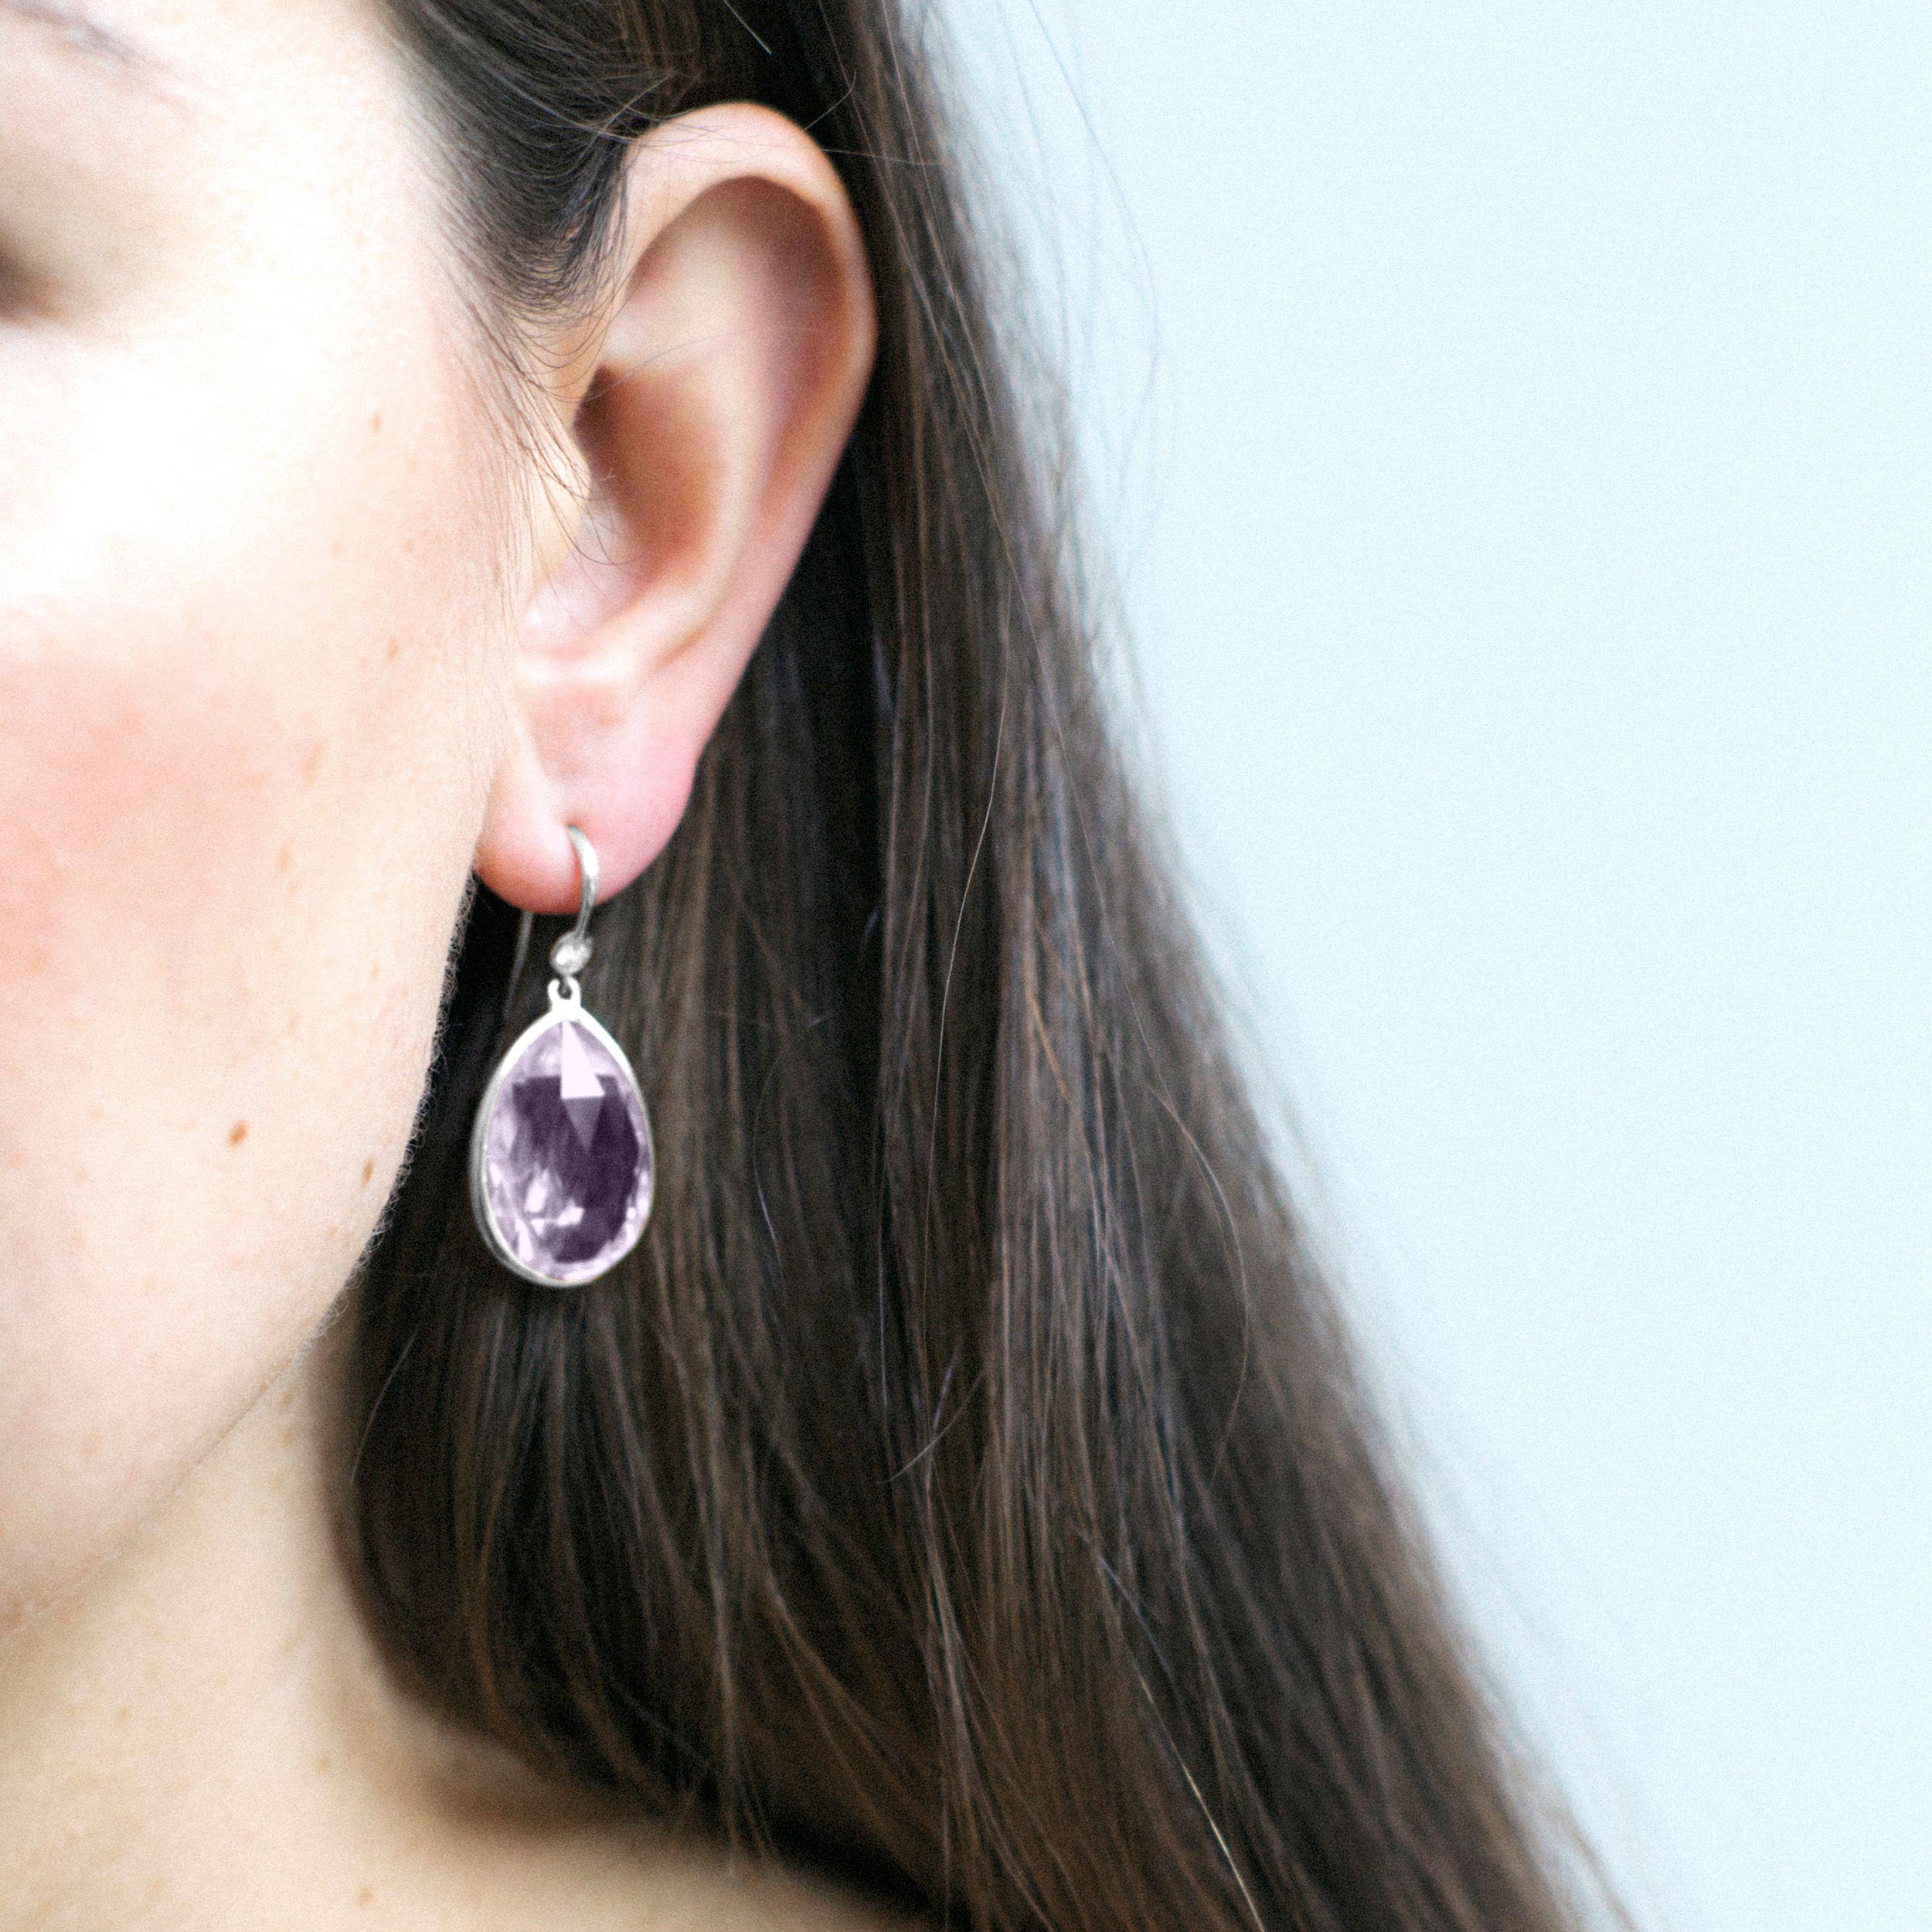 Contemporary Goshwara Lavender Amethyst Pear Shape with Diamonds on Wire Earrings